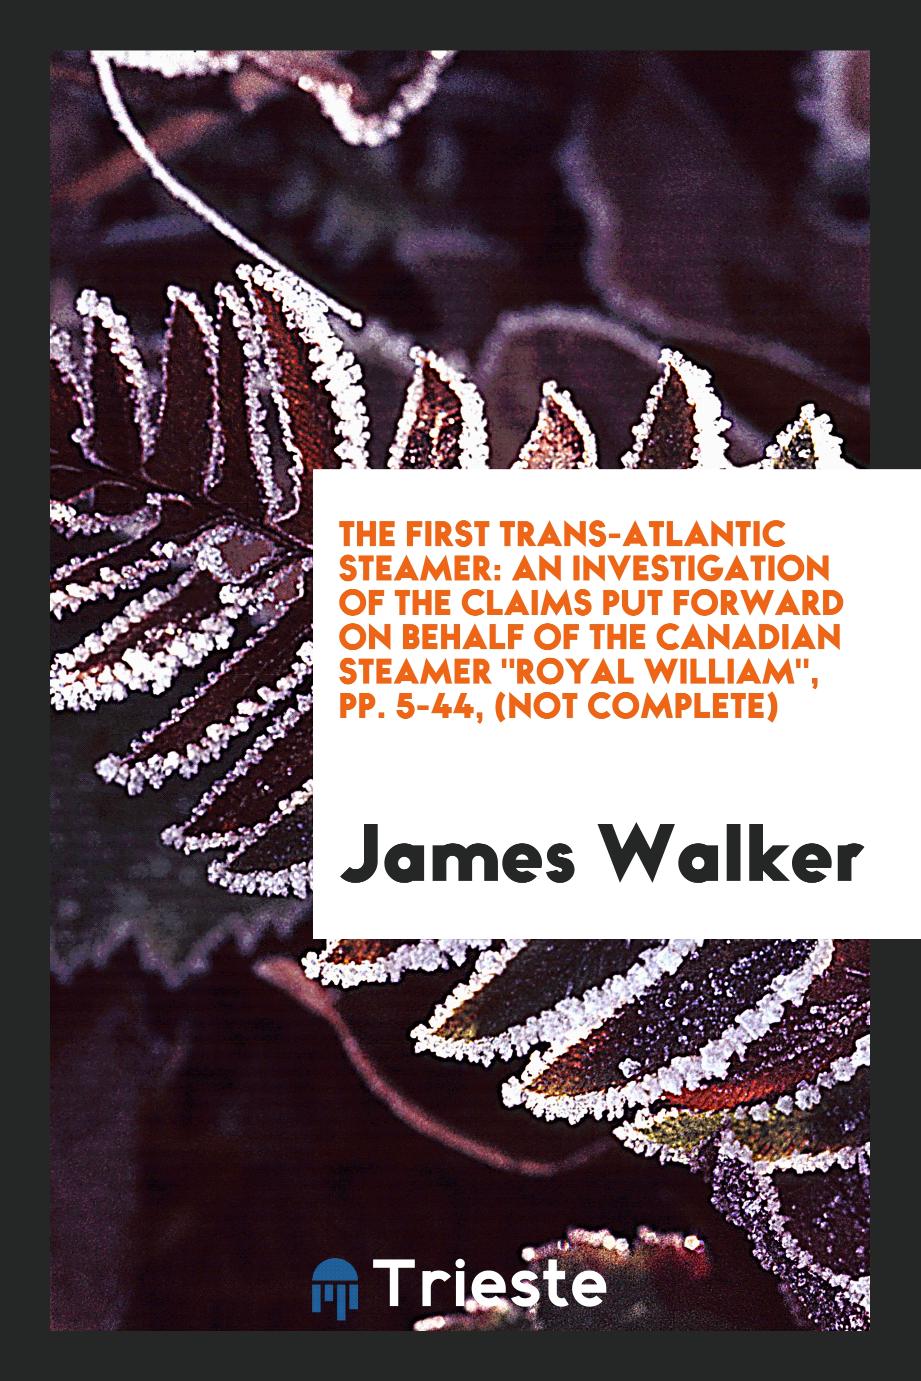 The First Trans-Atlantic Steamer: An Investigation of the Claims Put Forward on Behalf of the Canadian Steamer "Royal William", pp. 5-44, (not complete)